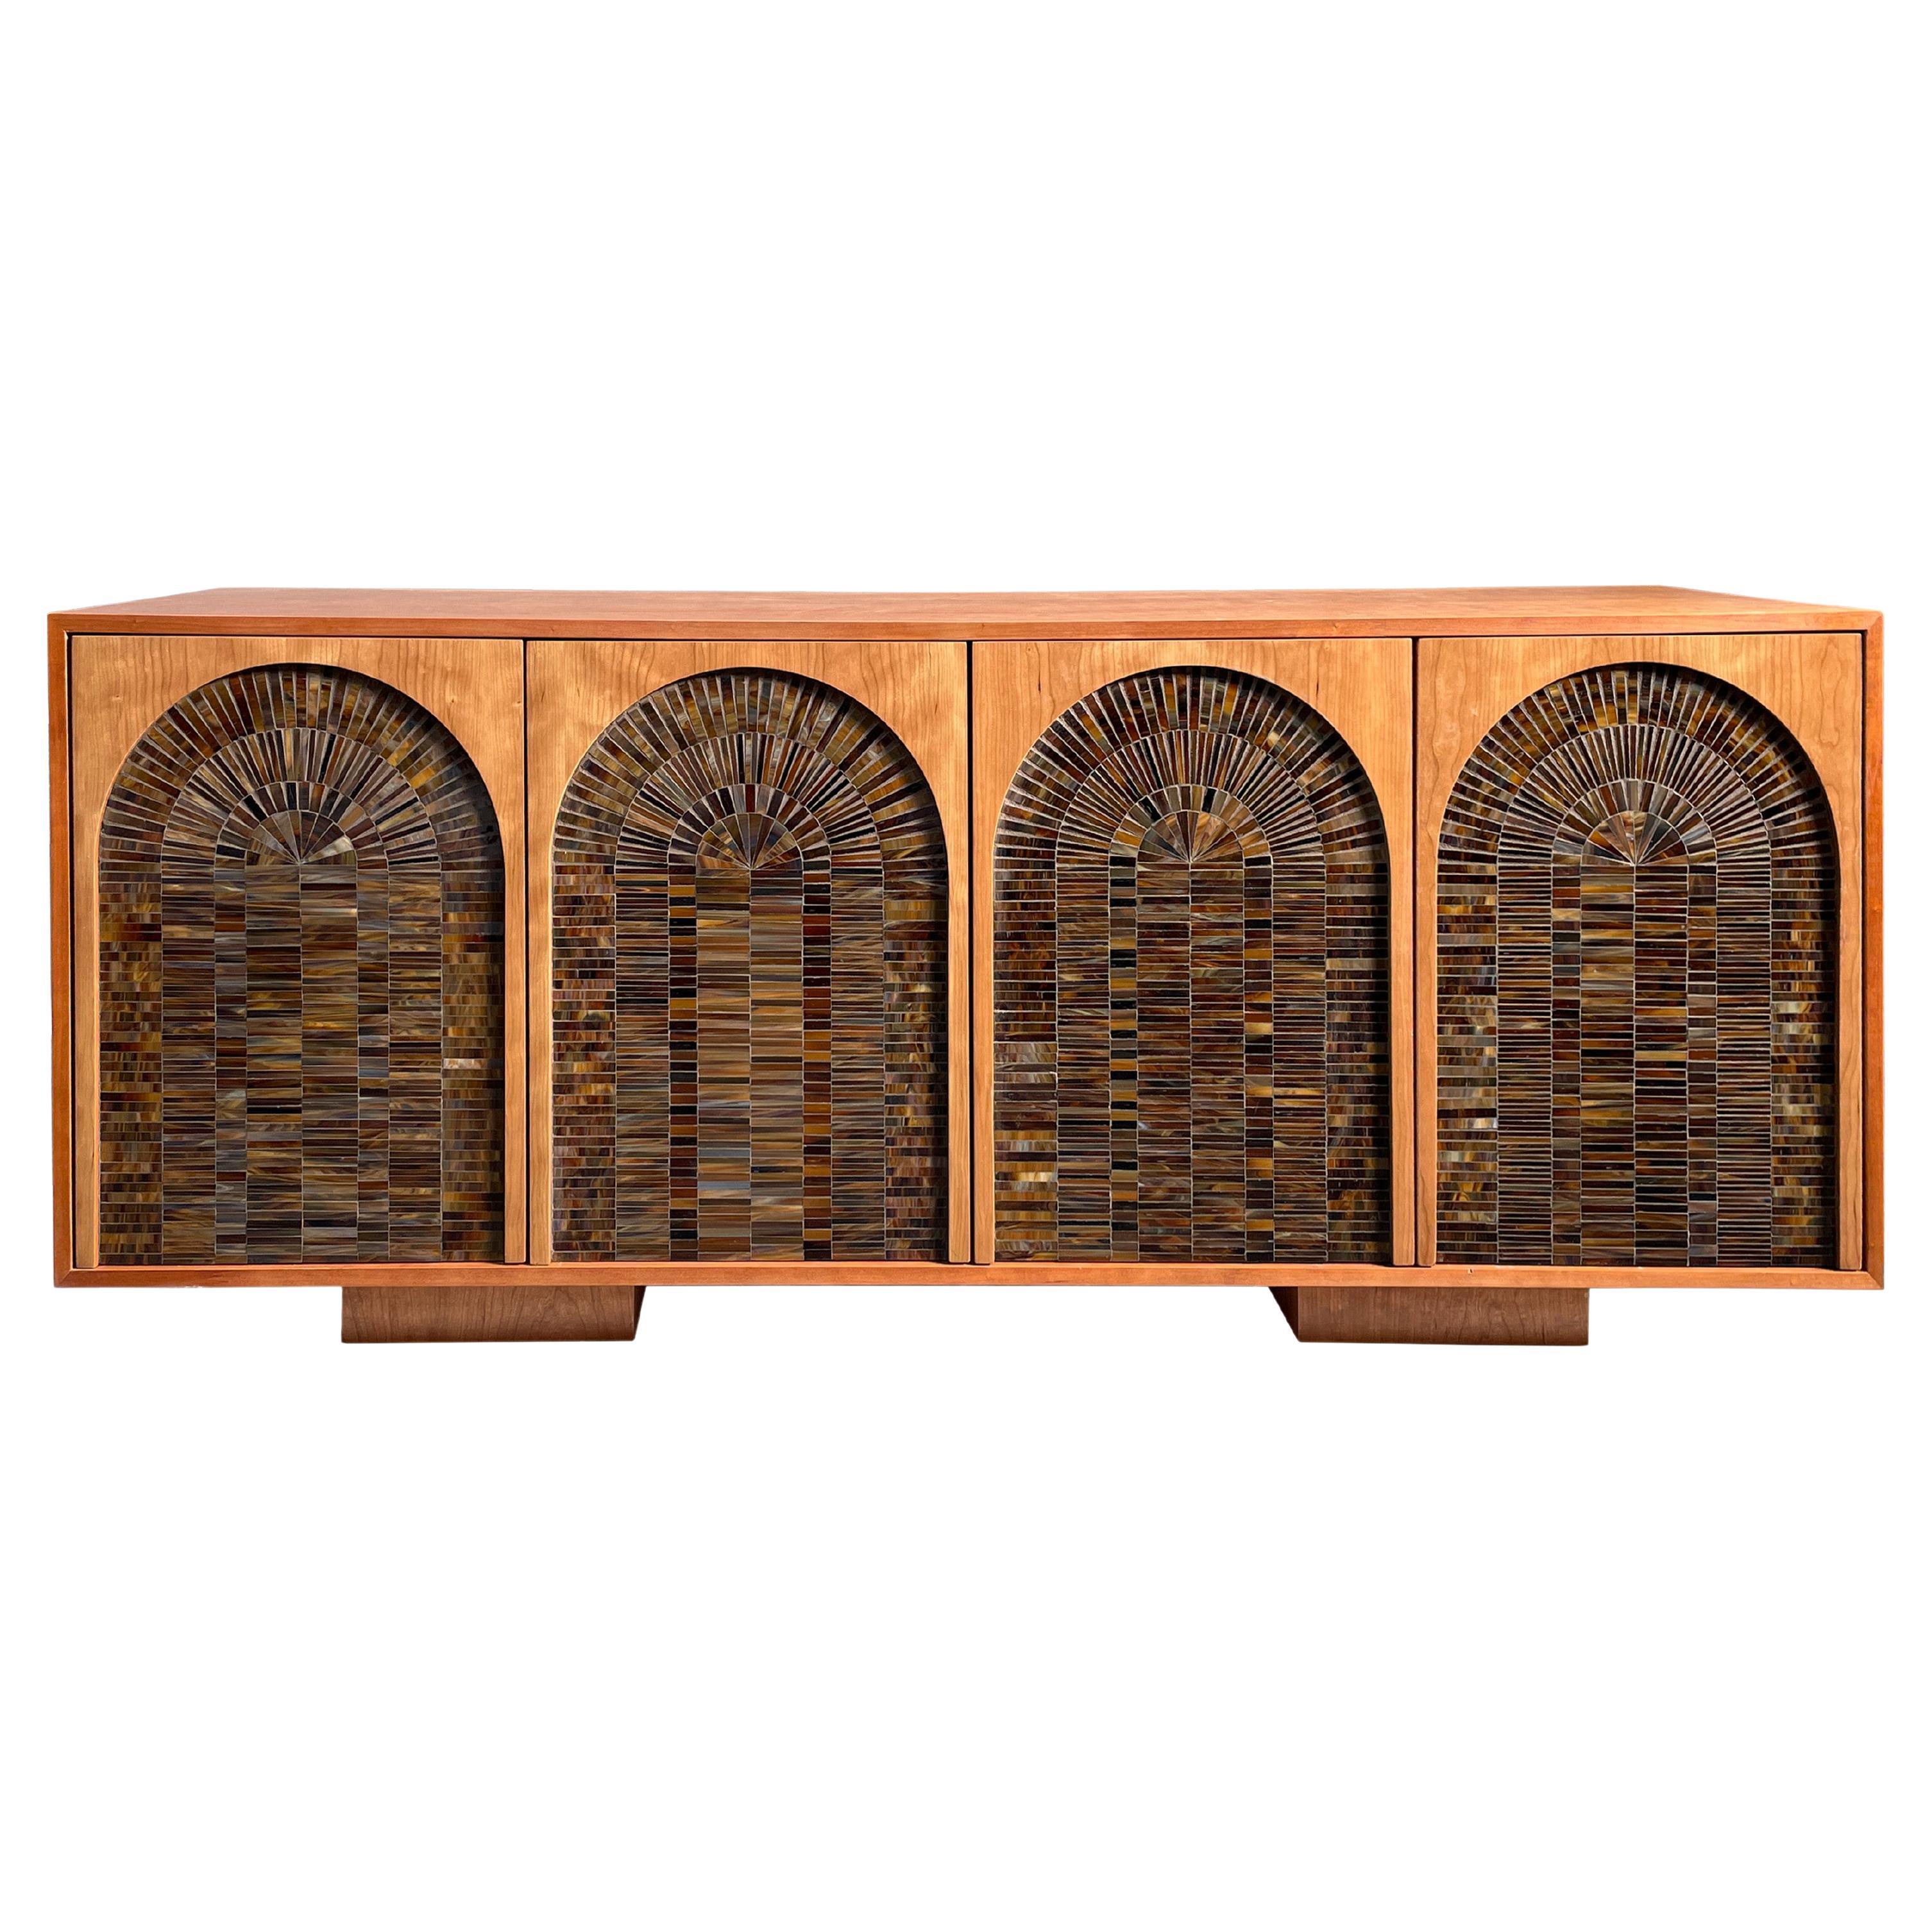 Modern Credenza 4 Door Cherry Wood and Glass Chocolate Mosaic by Ercole Home For Sale